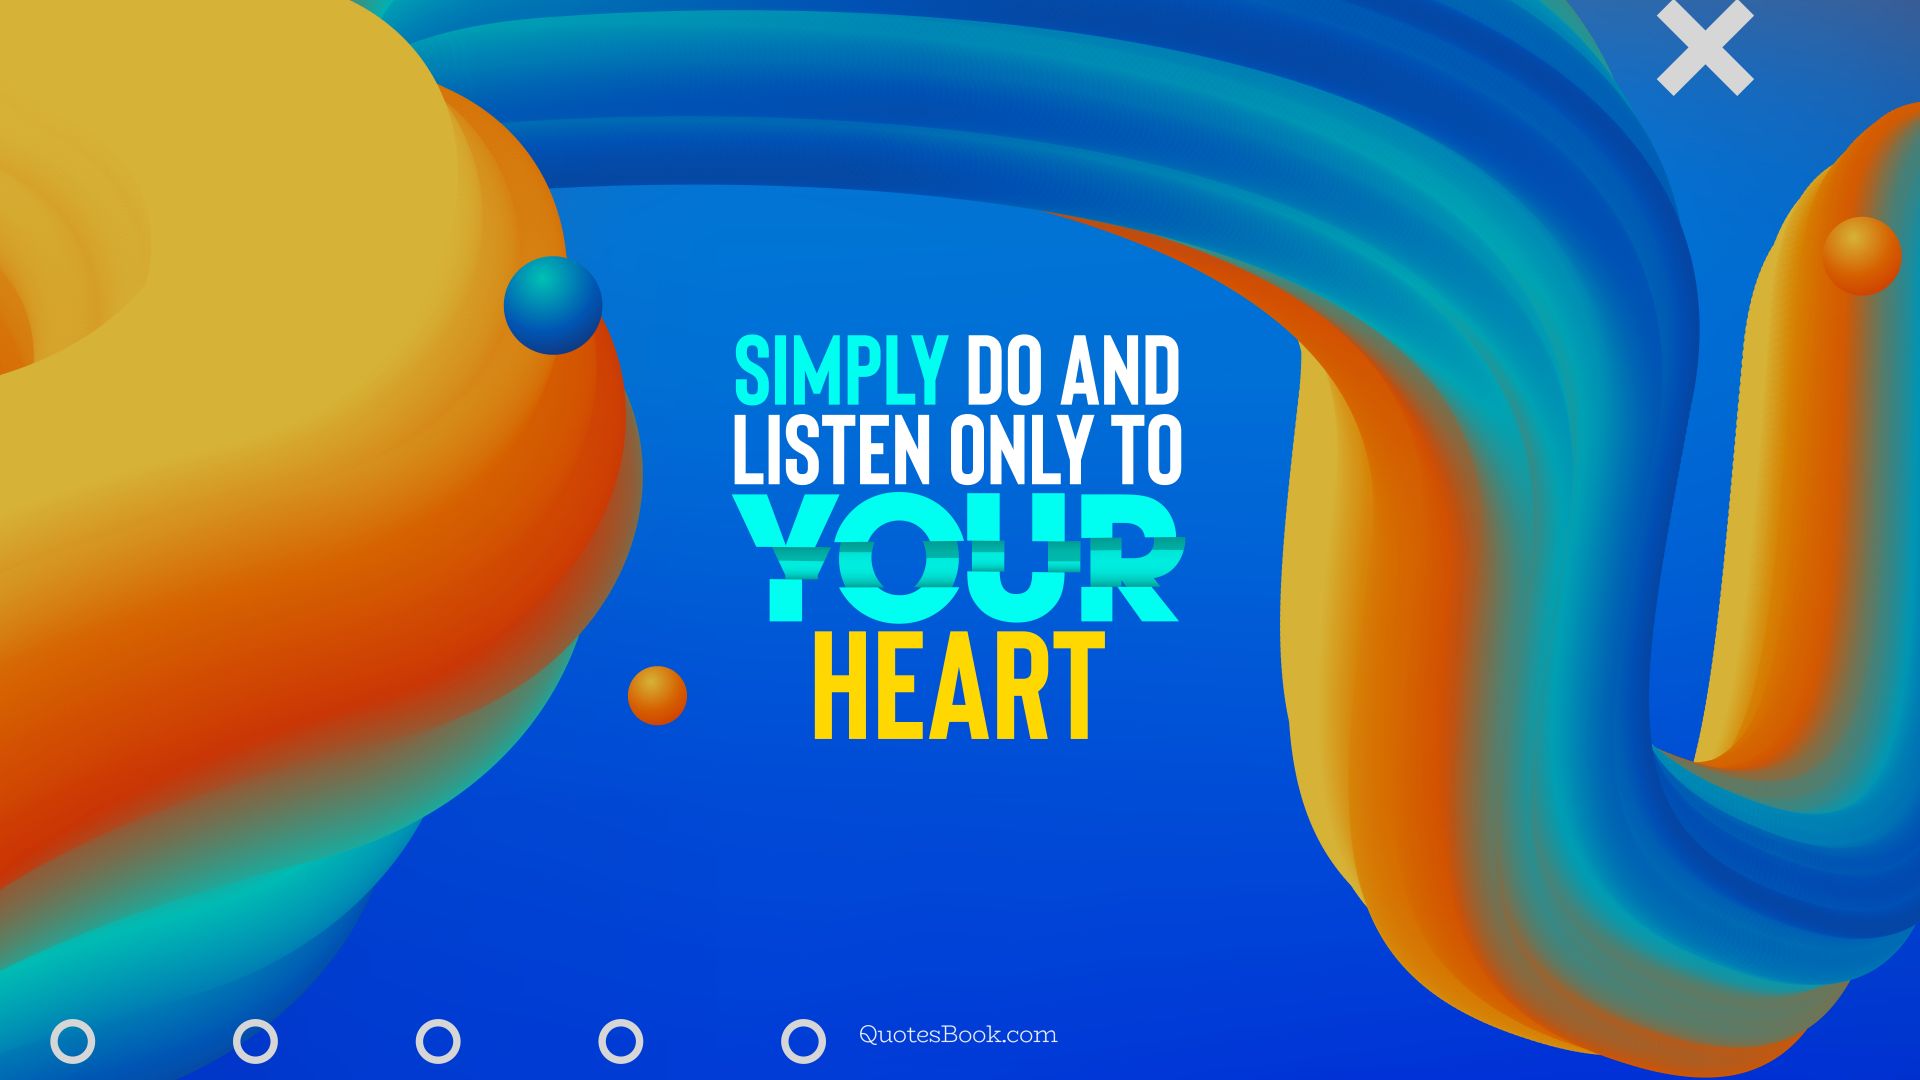 Simply do and listen only to your heart